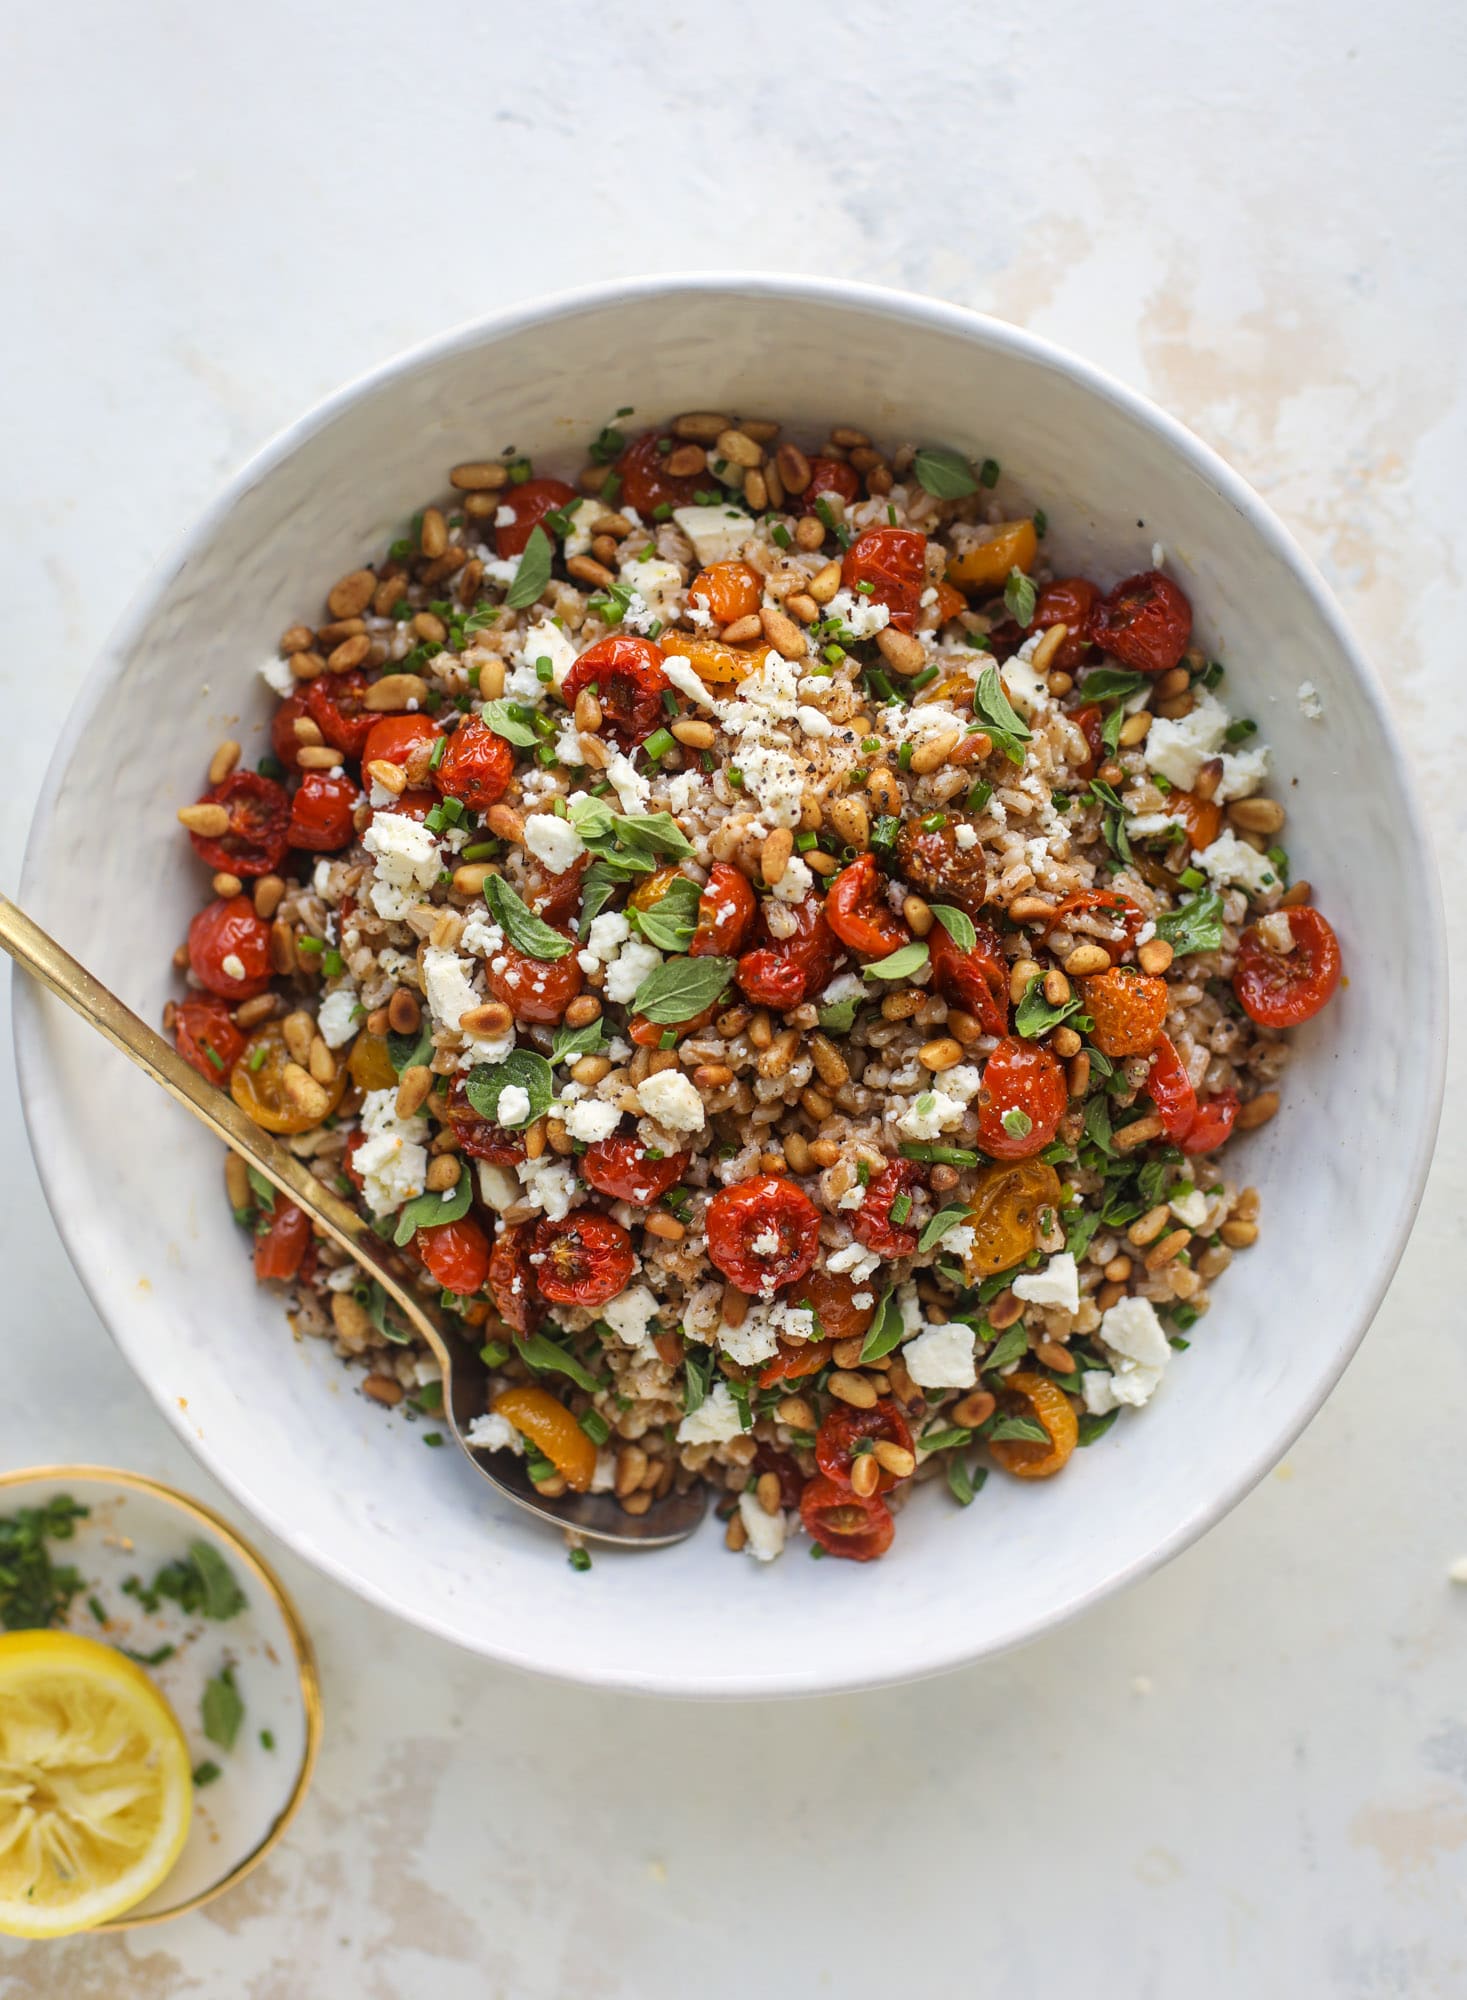 A tomato farro salad that is sweet from the slow roasted tomatoes, tangy from the feta cheese, chewy from the farro and bright from the lemon!